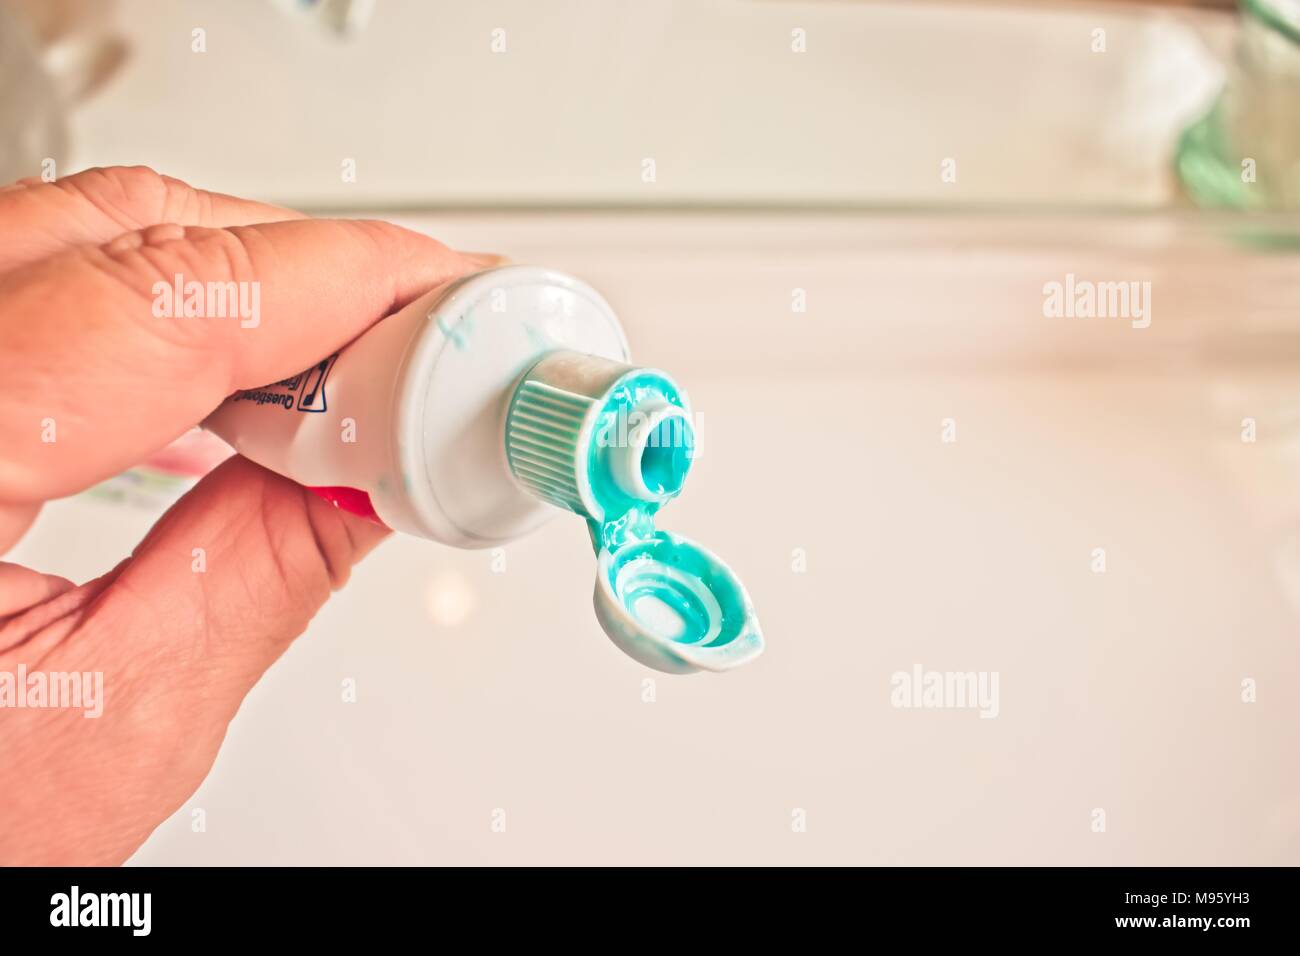 Hand holding a messy toothpaste tube Stock Photo